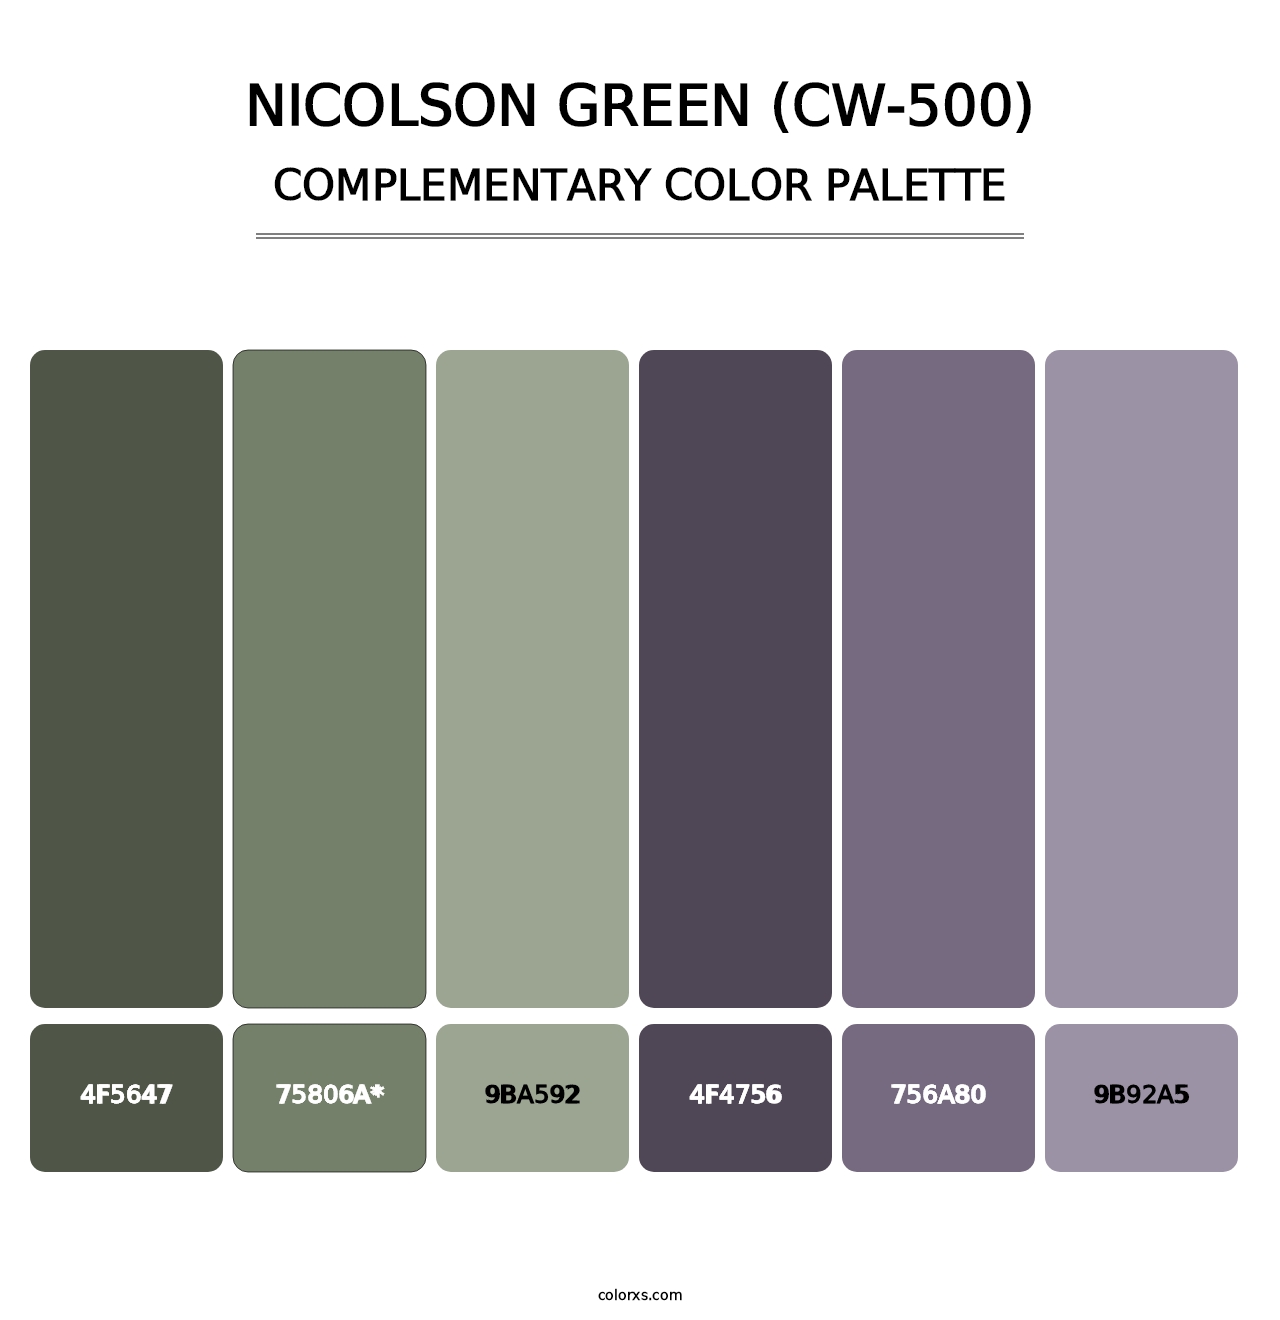 Nicolson Green (CW-500) - Complementary Color Palette